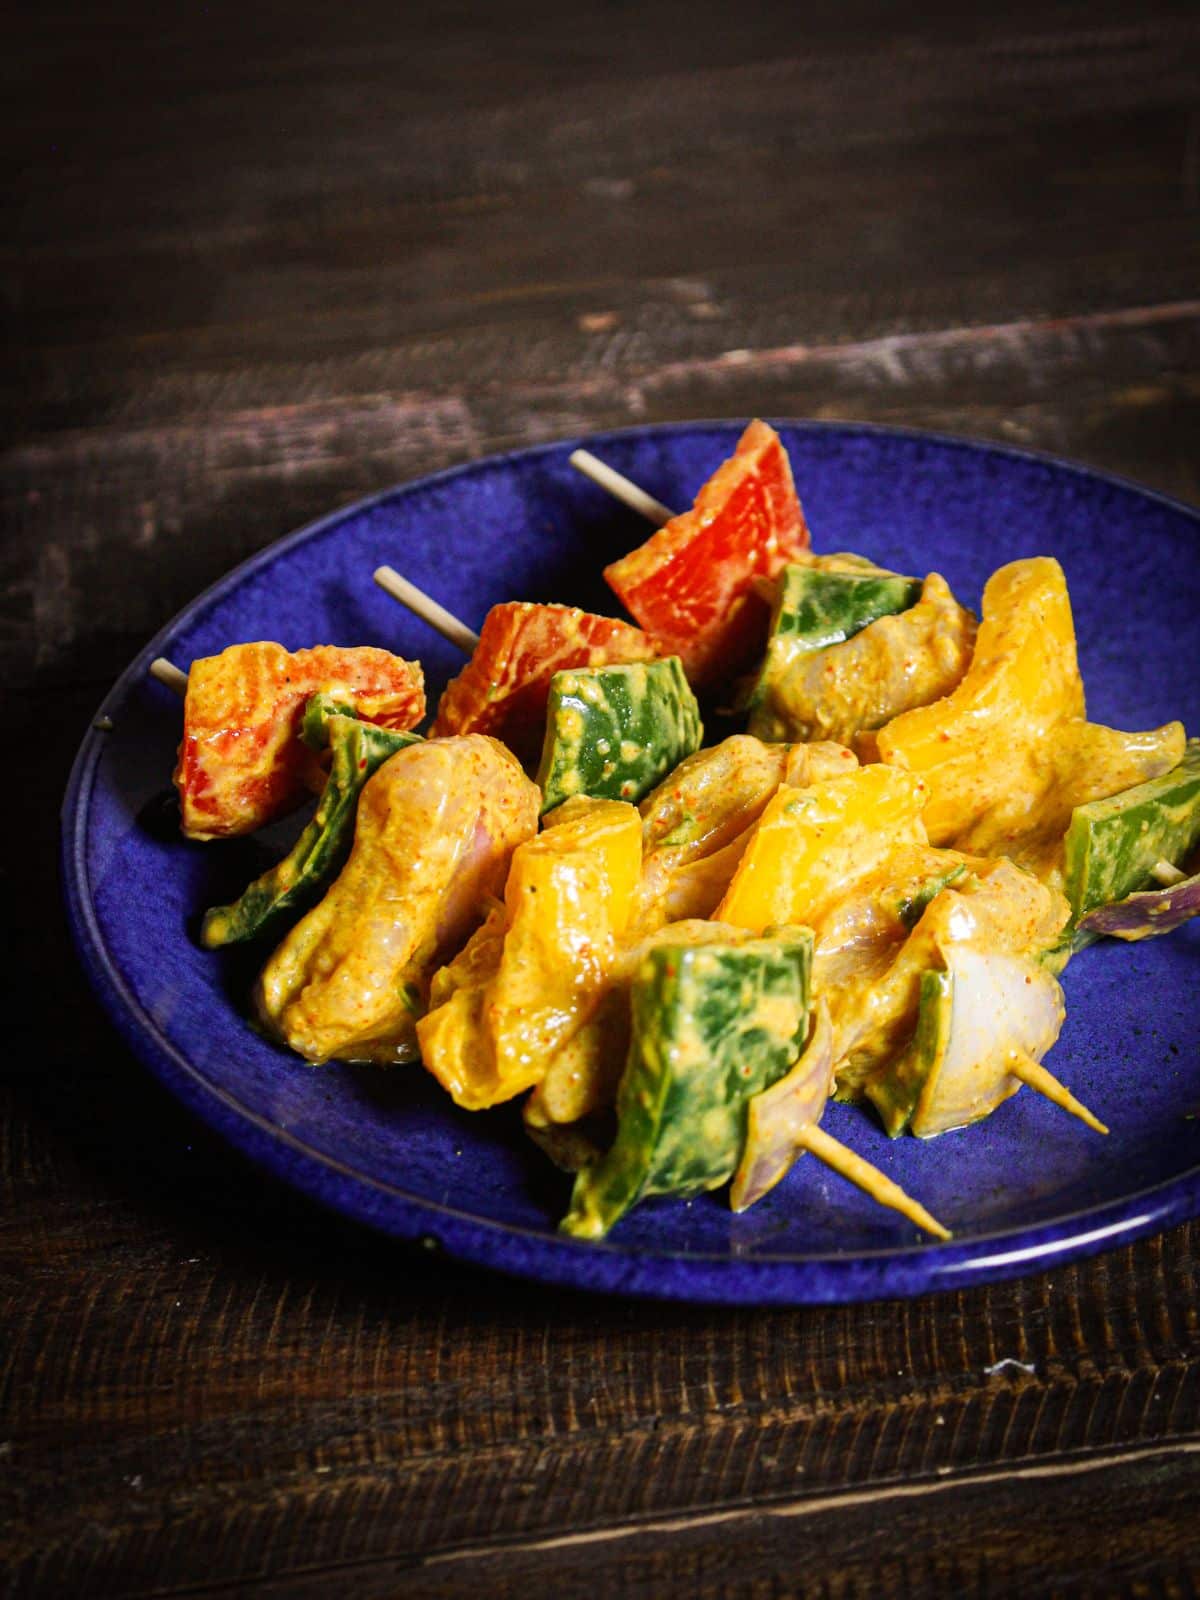 Insert marinated vegetables and chicken pieces into the skewers according to the shape and sizes